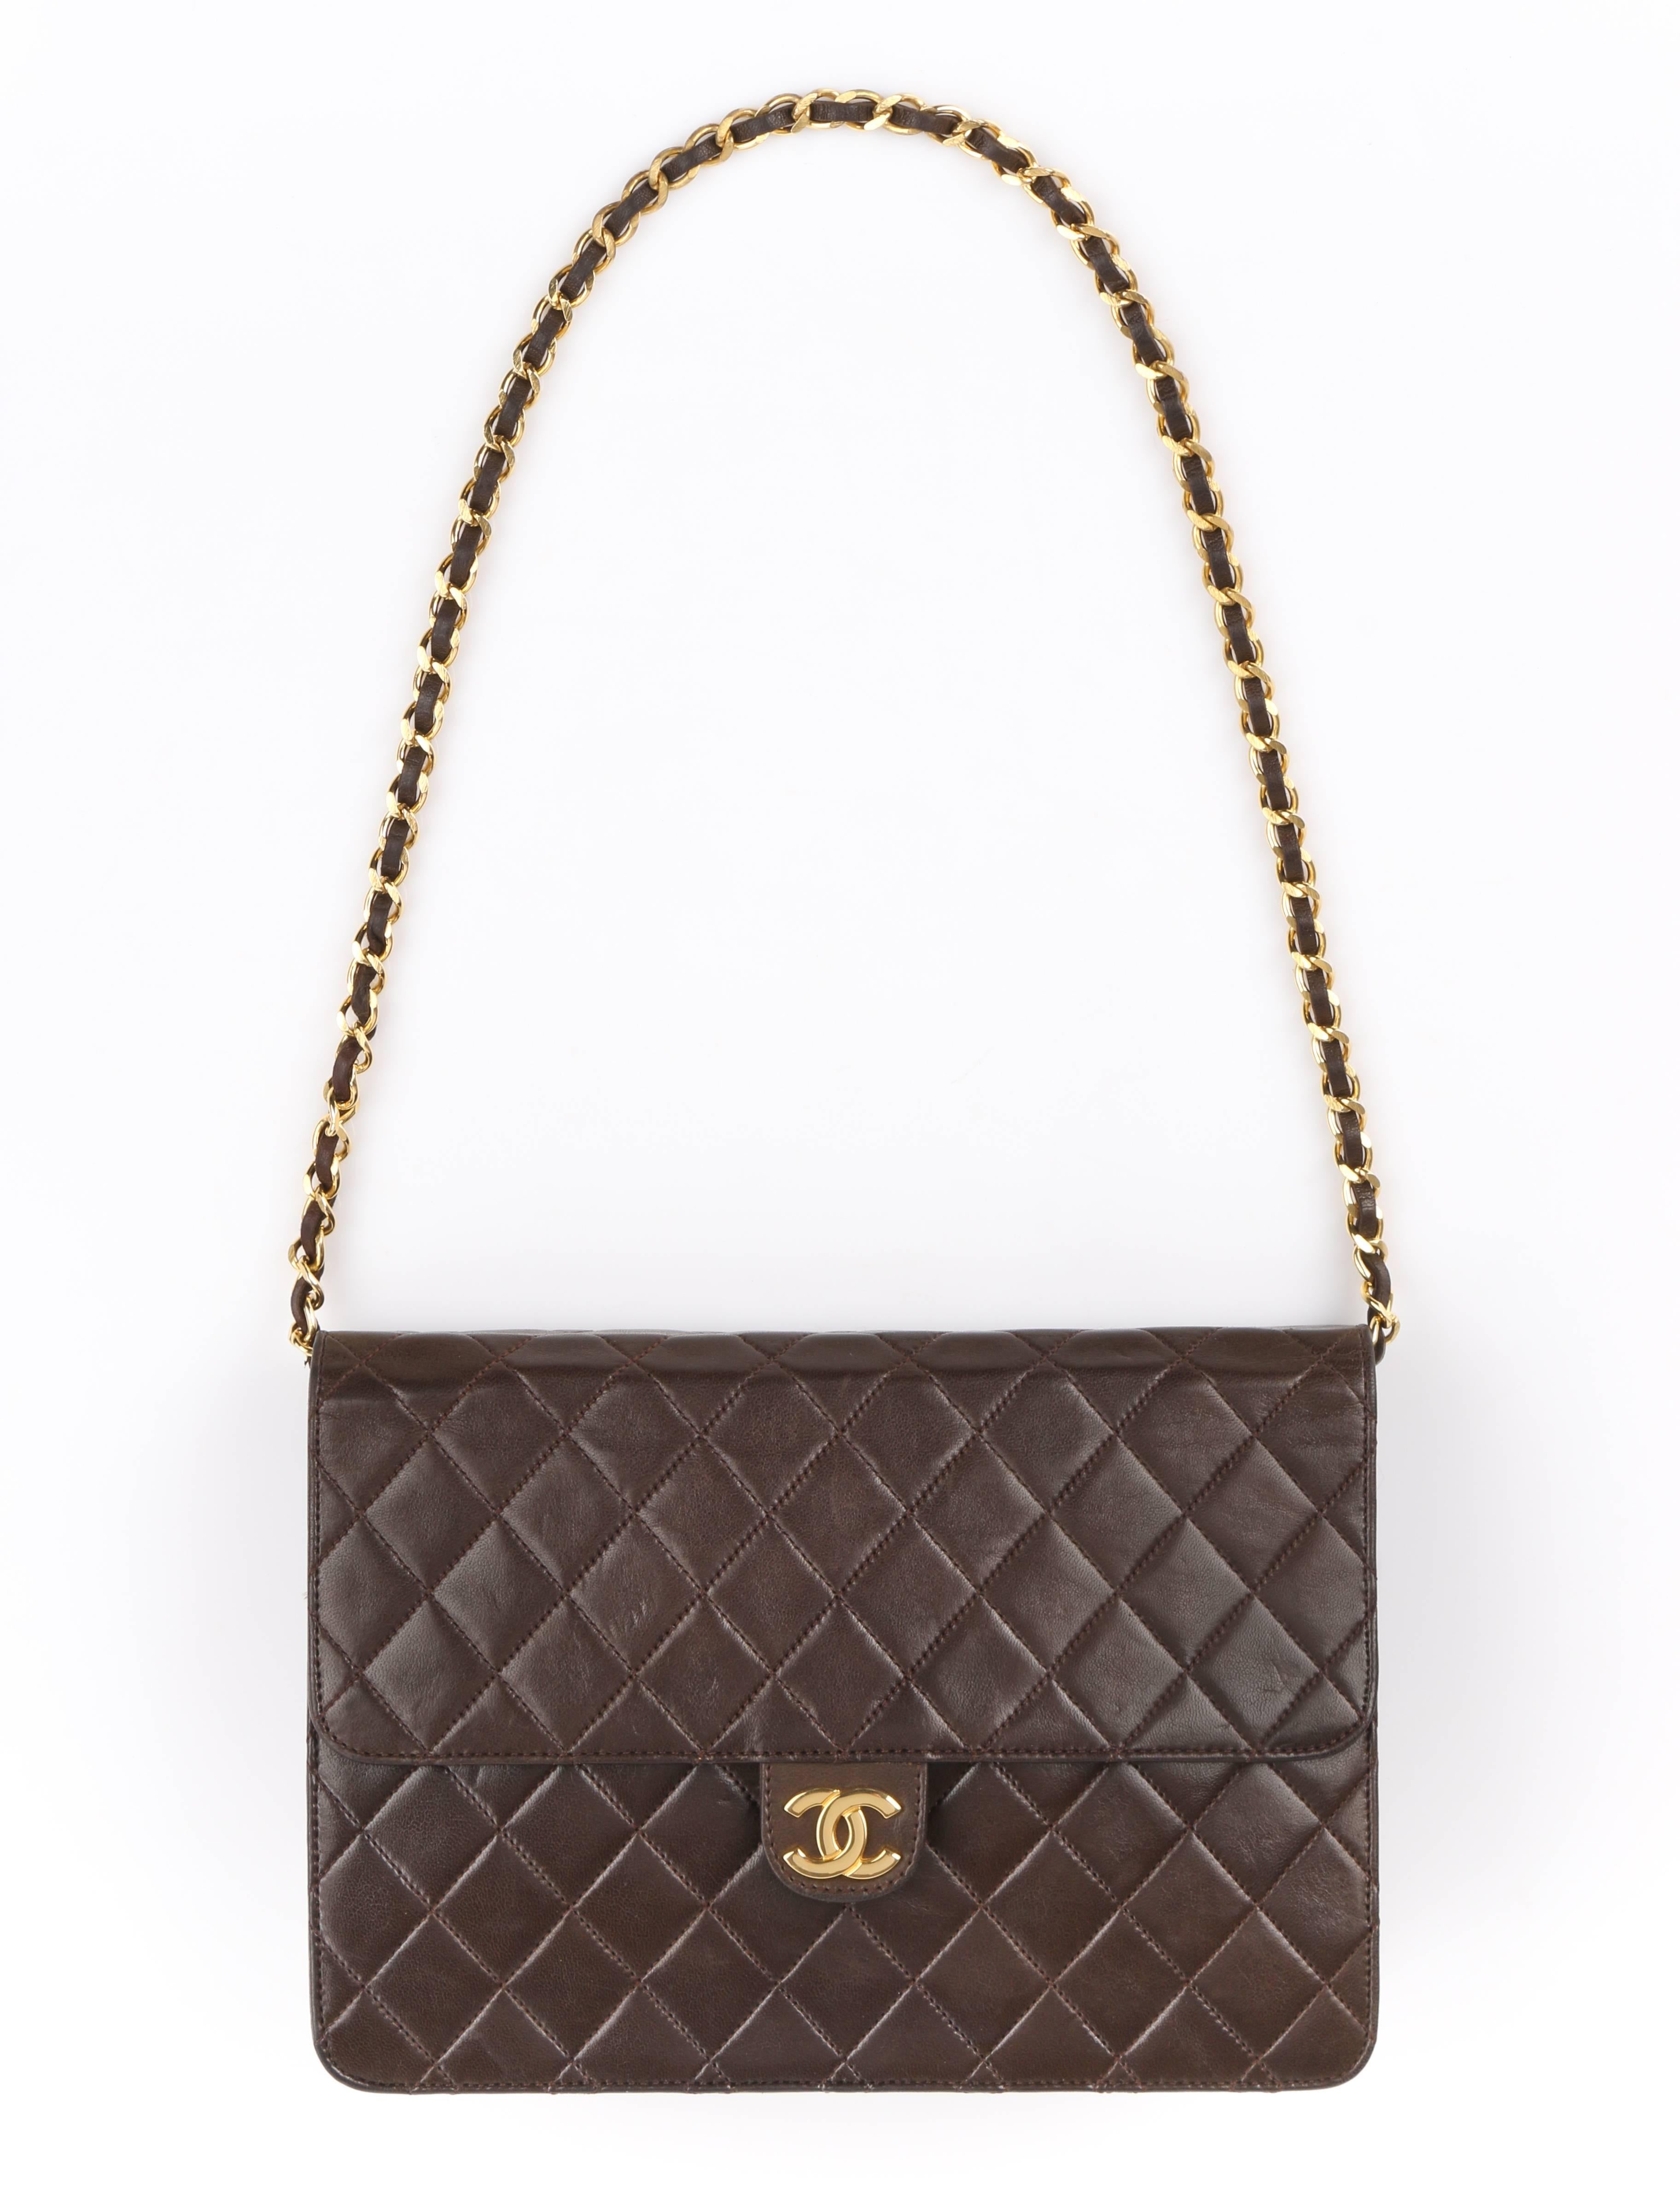 Chanel c.1990's brown diamond quilted lambskin leather classic flap bag. Designed by Karl Lagerfeld. Chocolate brown diamond quilted leather exterior. Flap top with gold-toned metal interlocking 